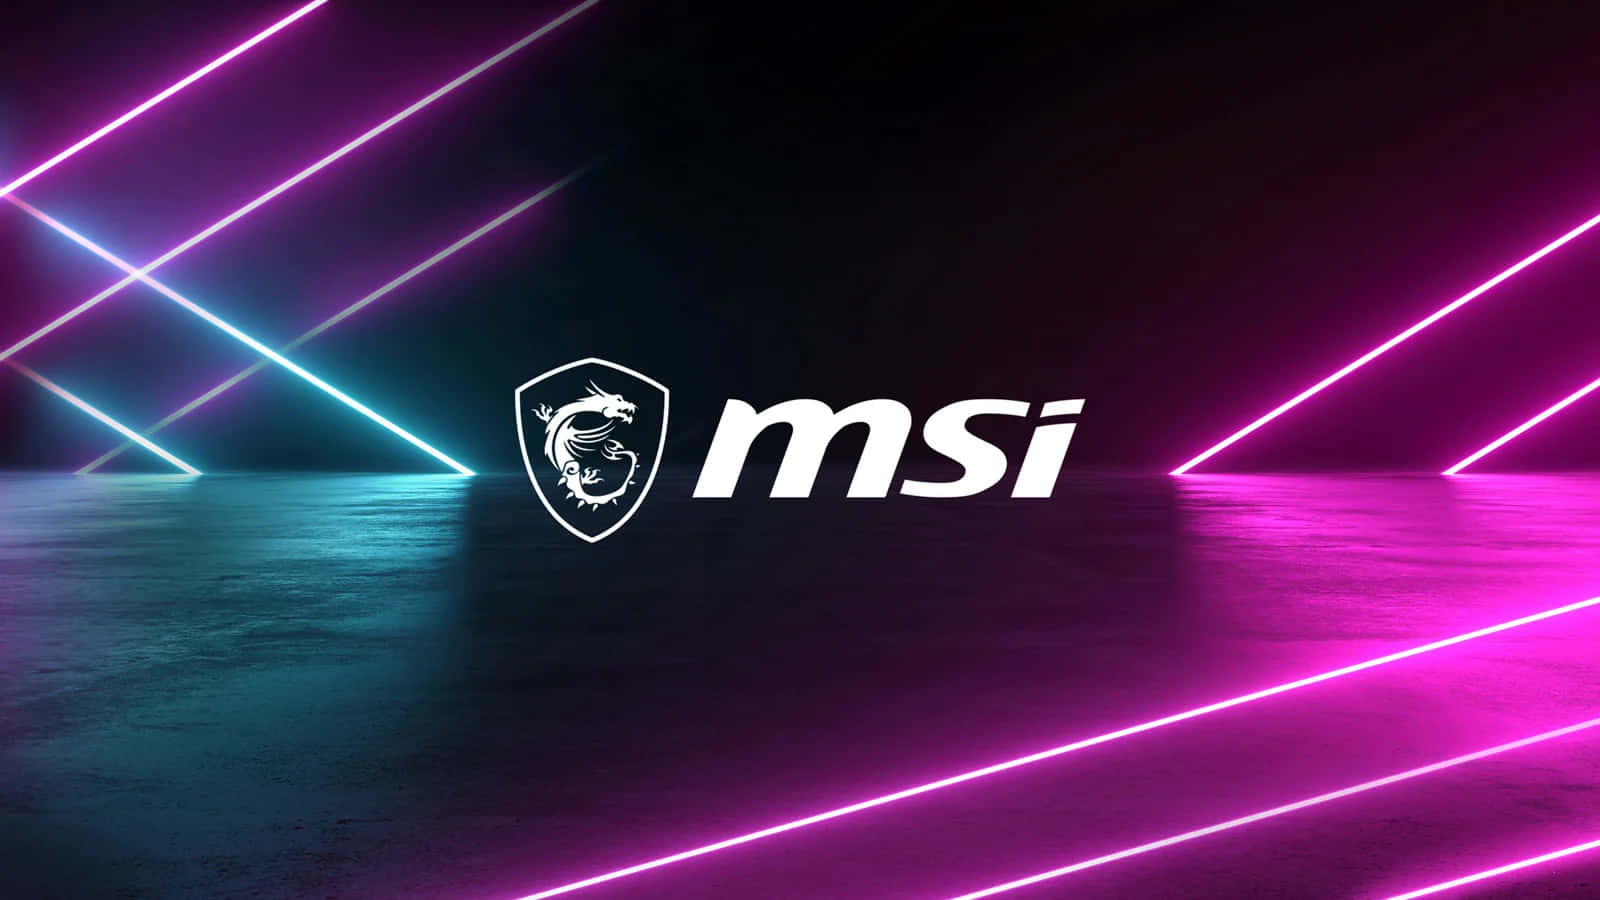 Get ready to take on the world #MSI